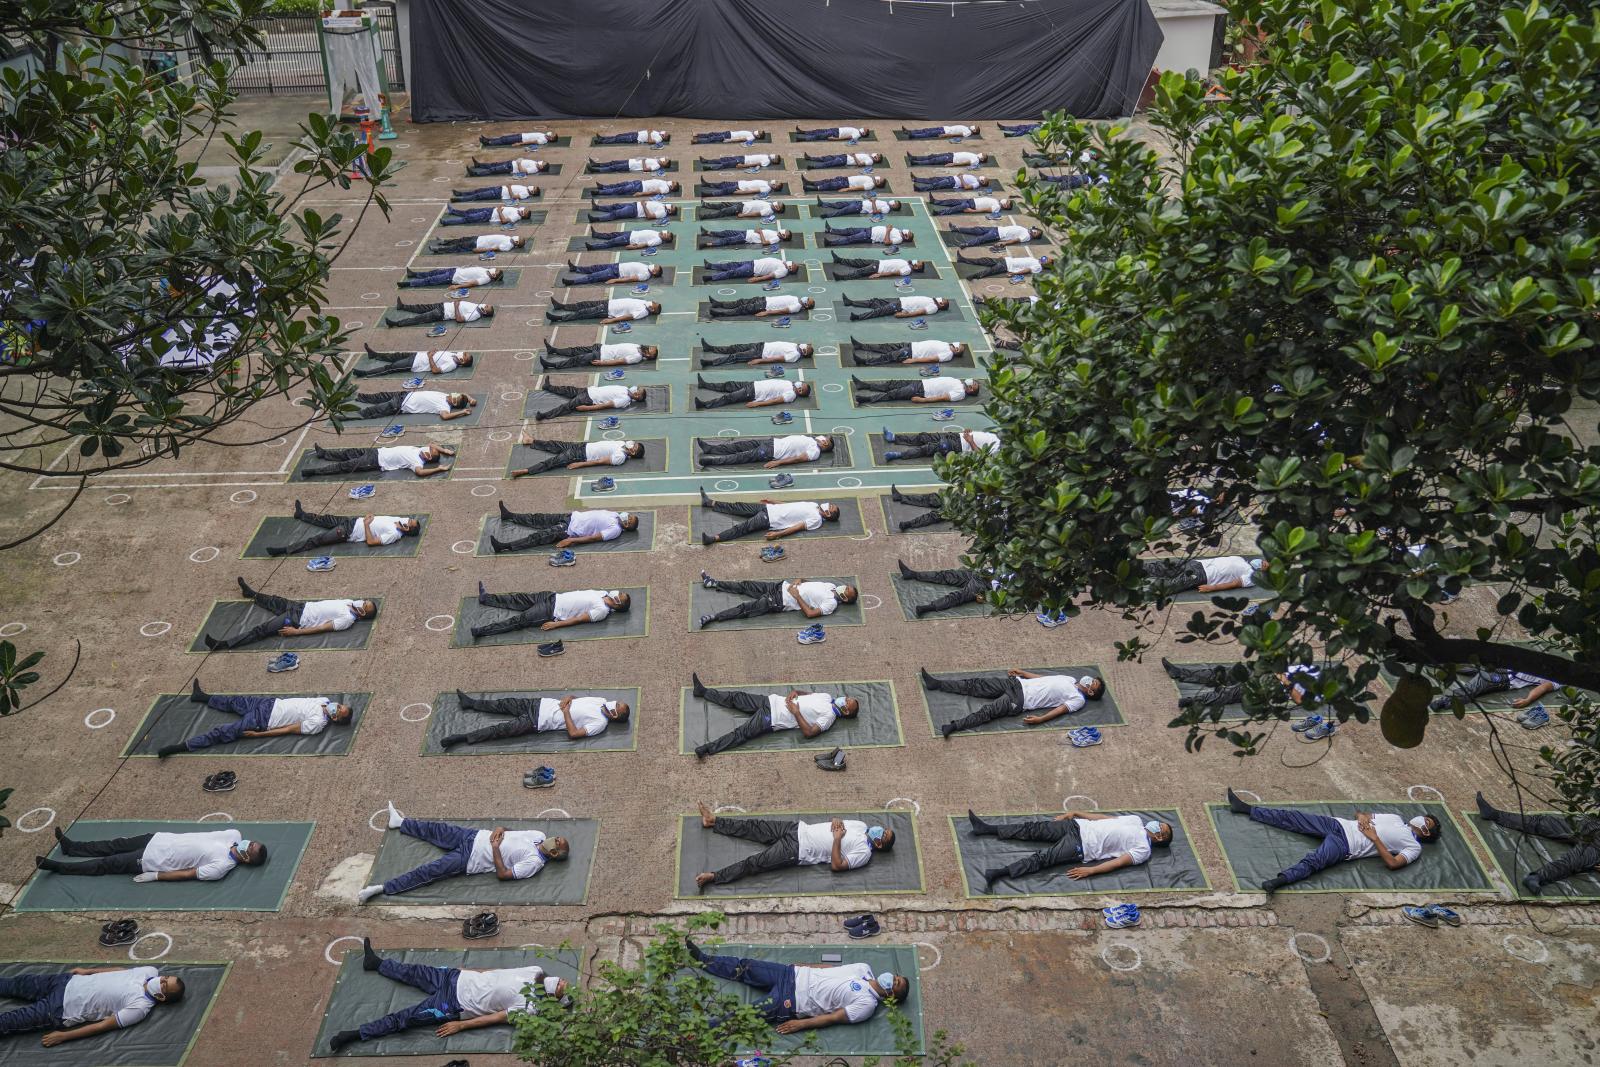 Bangladesh police attend a yoga session during COVID-19. | Buy this image